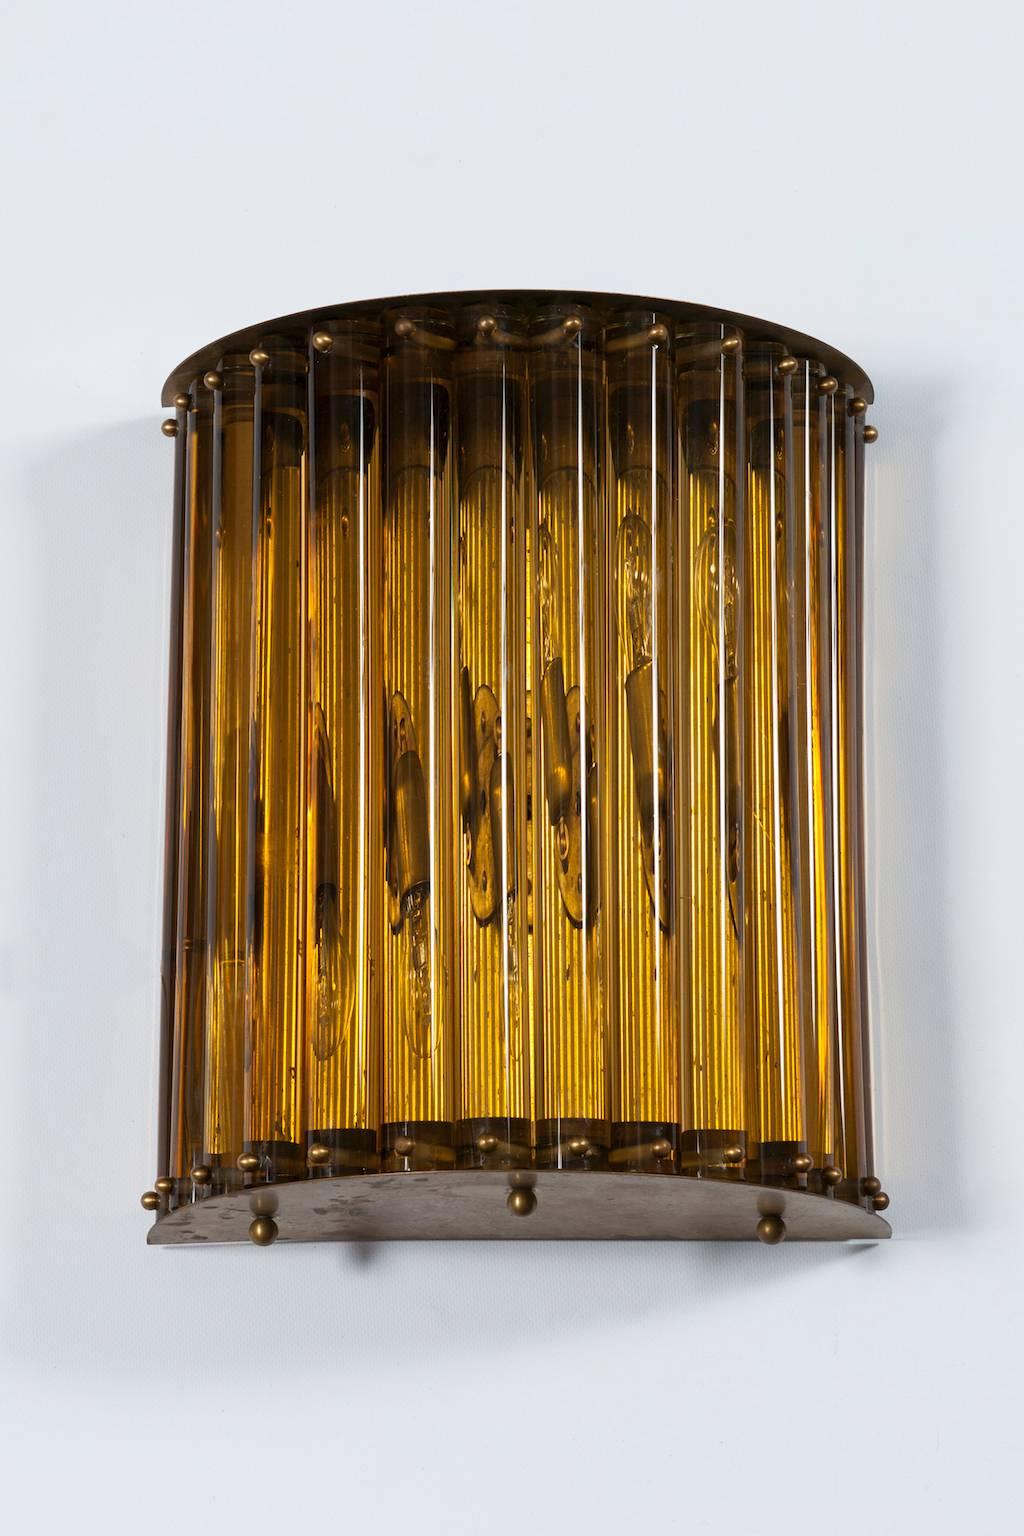 Massive single Wall Sconce in blown Murano Glass in amber color 1960s Italy.
This single sconce is a work of art that is adapt to be installed in yard or garden is properly protected from the rain, as well as inside a building. This is an